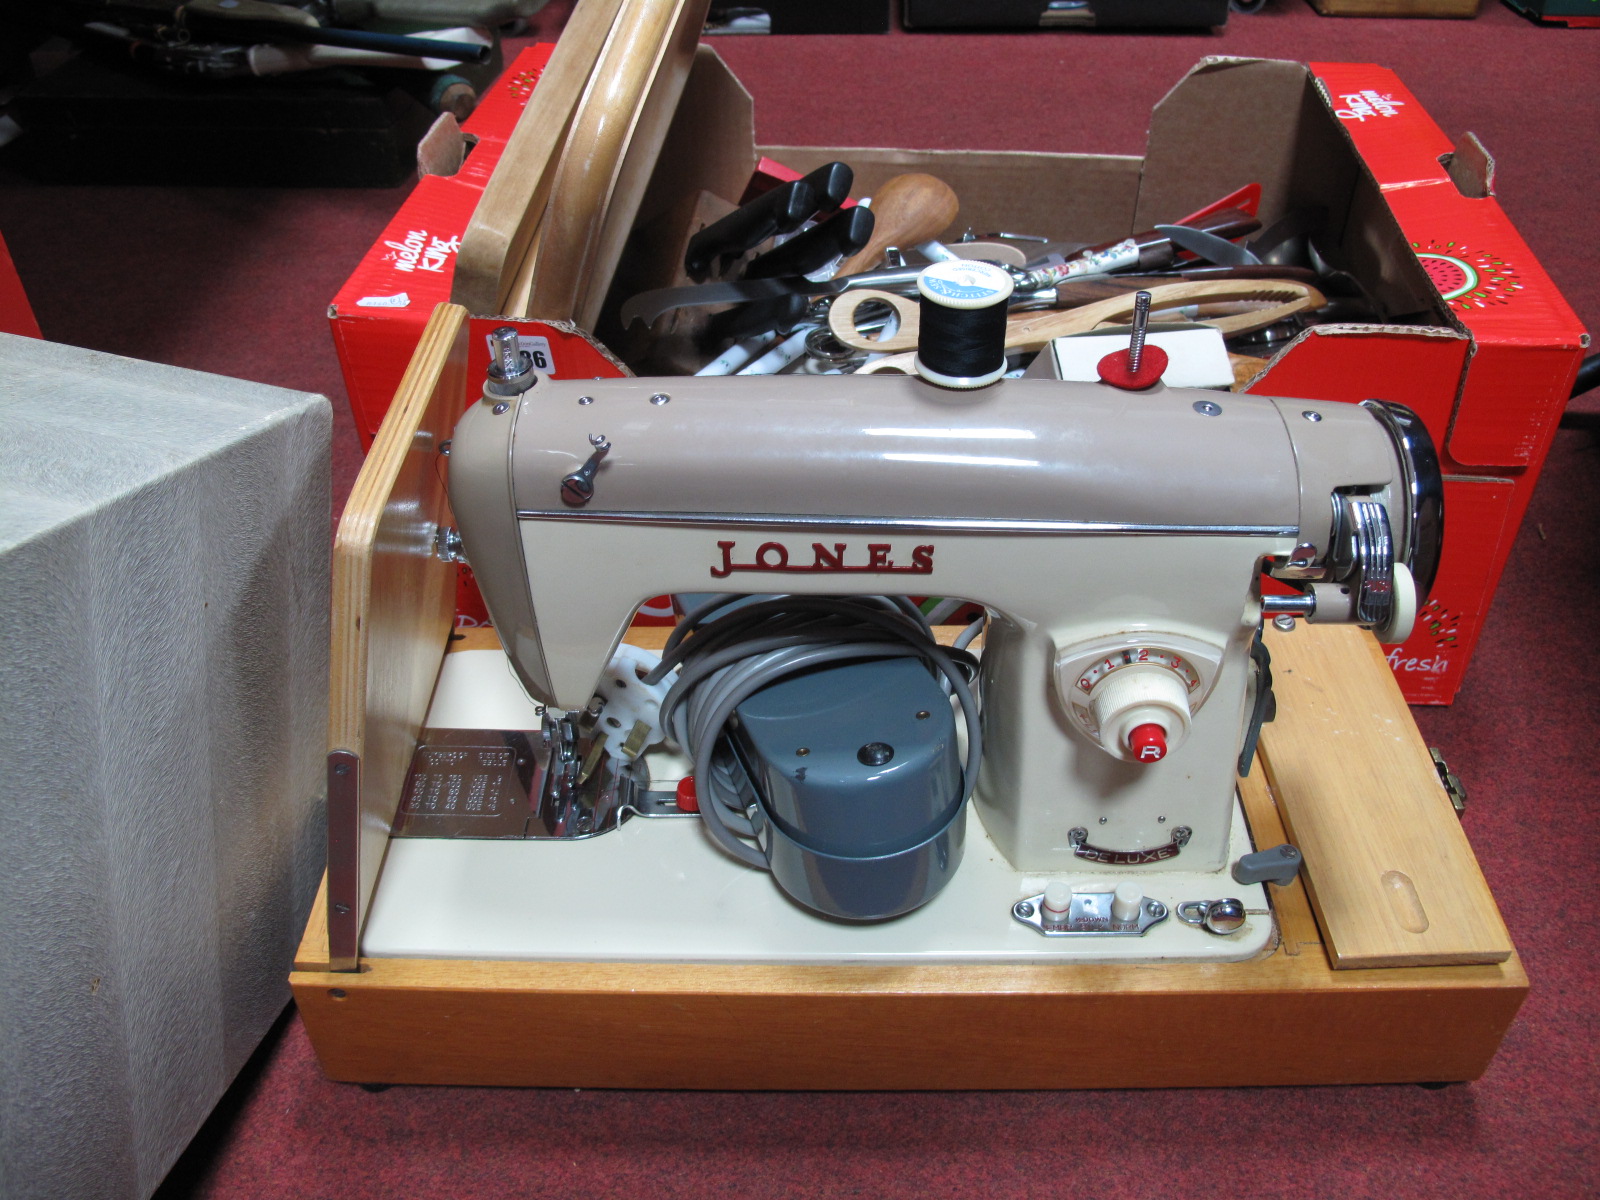 One Box Quantity of Cutlery, Jones electric sewing machine, (Untested: sold for parts only).